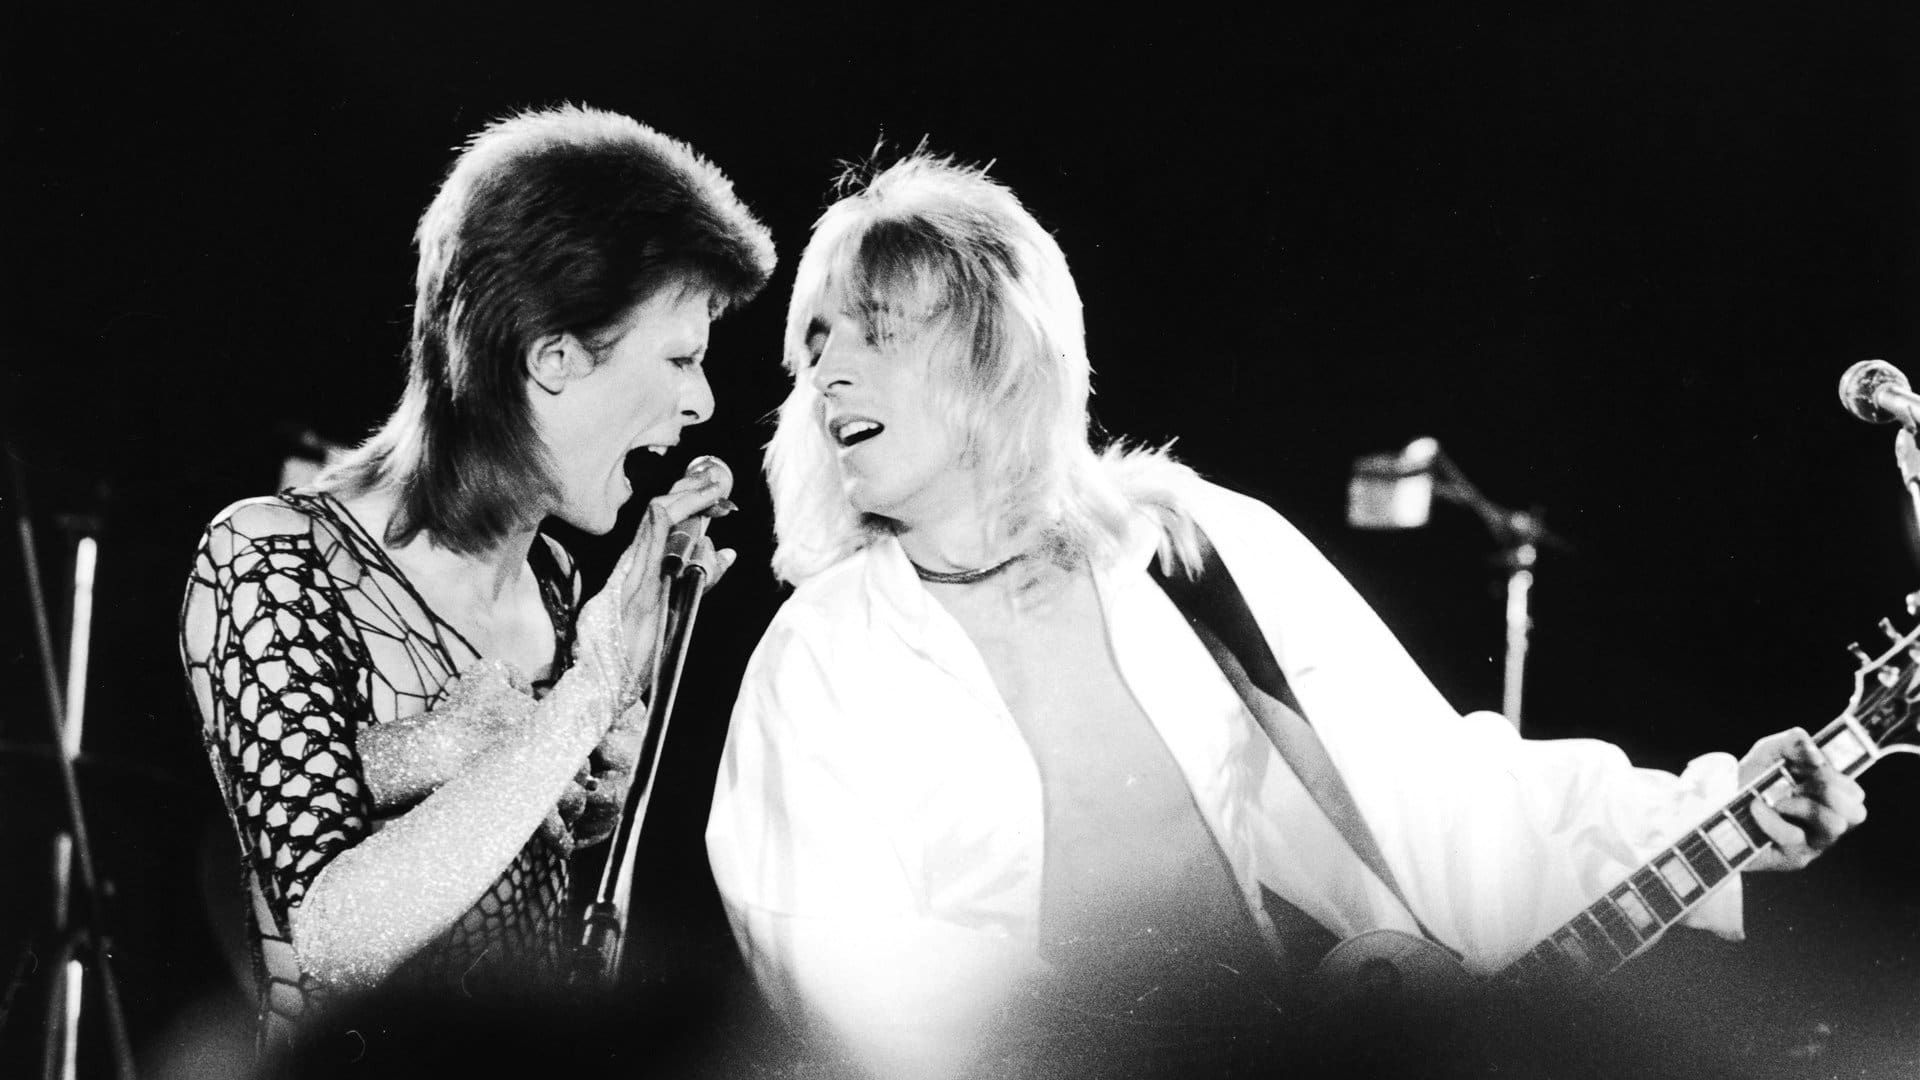 Beside Bowie: The Mick Ronson Story background